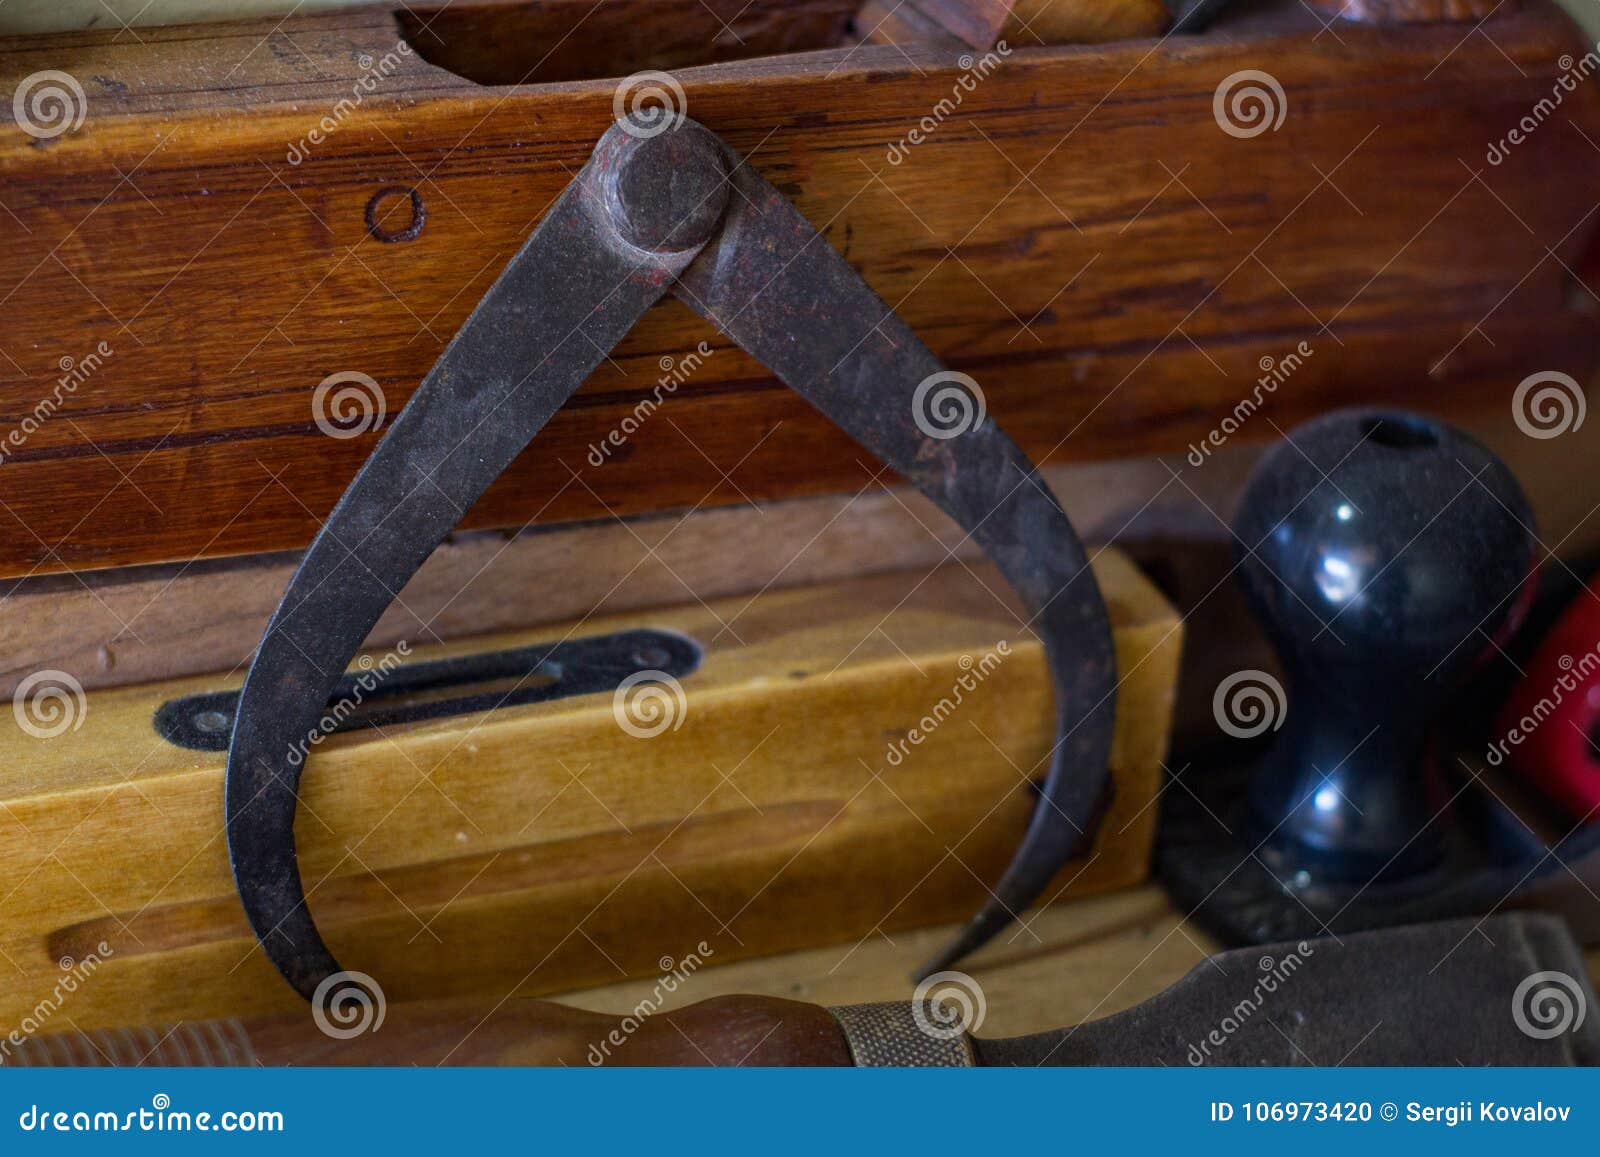 Old tools for woodworking stock photo. Image of industry - 106973420